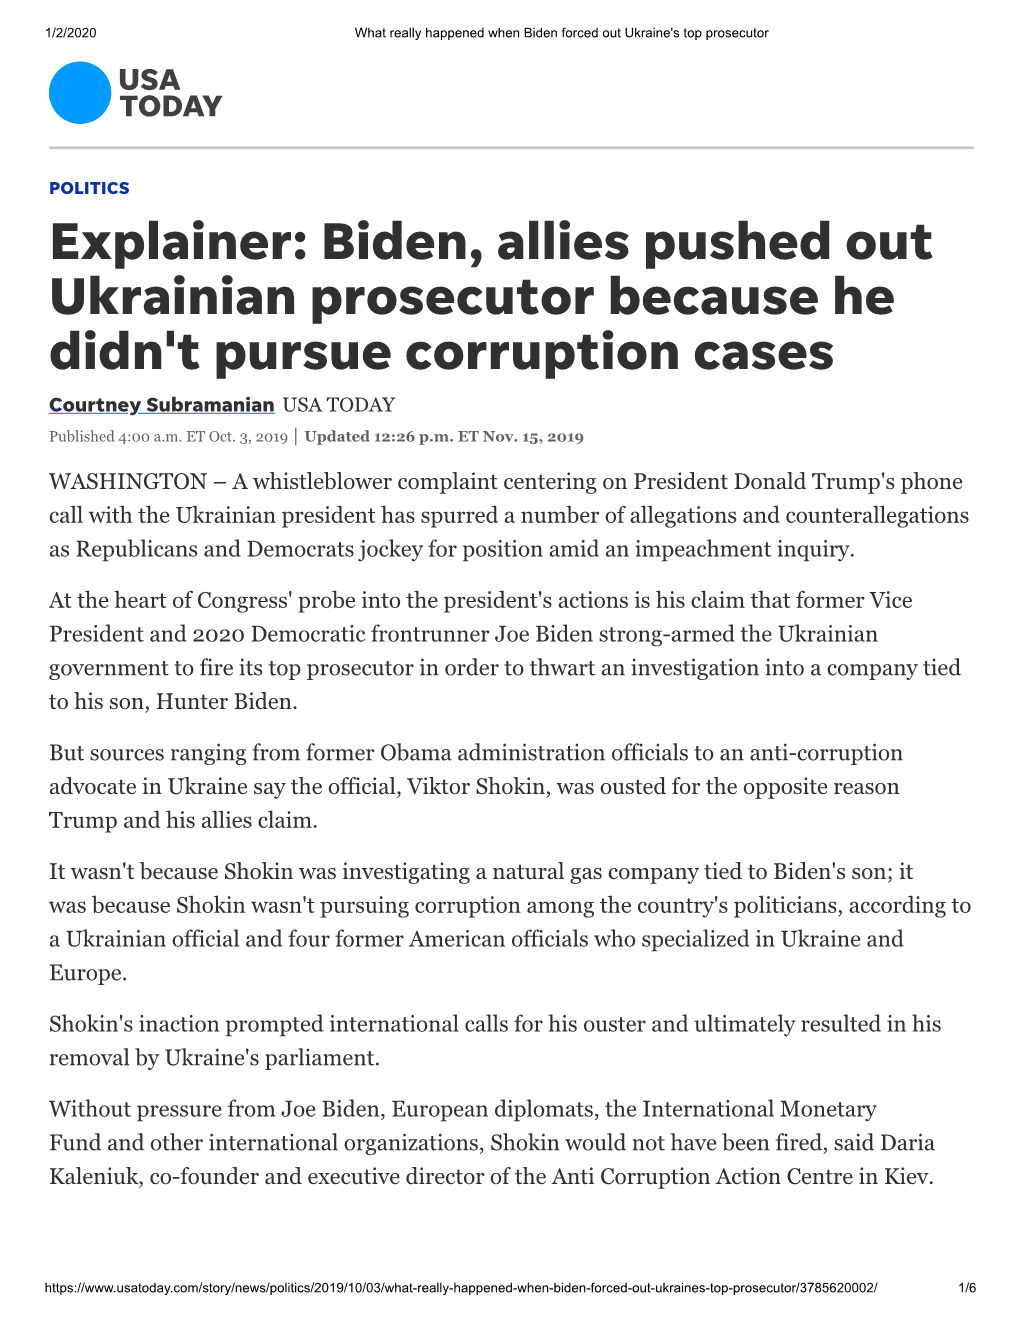 Biden, Allies Pushed out Ukrainian Prosecutor Because He Didn't Pursue Corruption Cases Courtney Subramanian USA TODAY Published 4:00 A.M